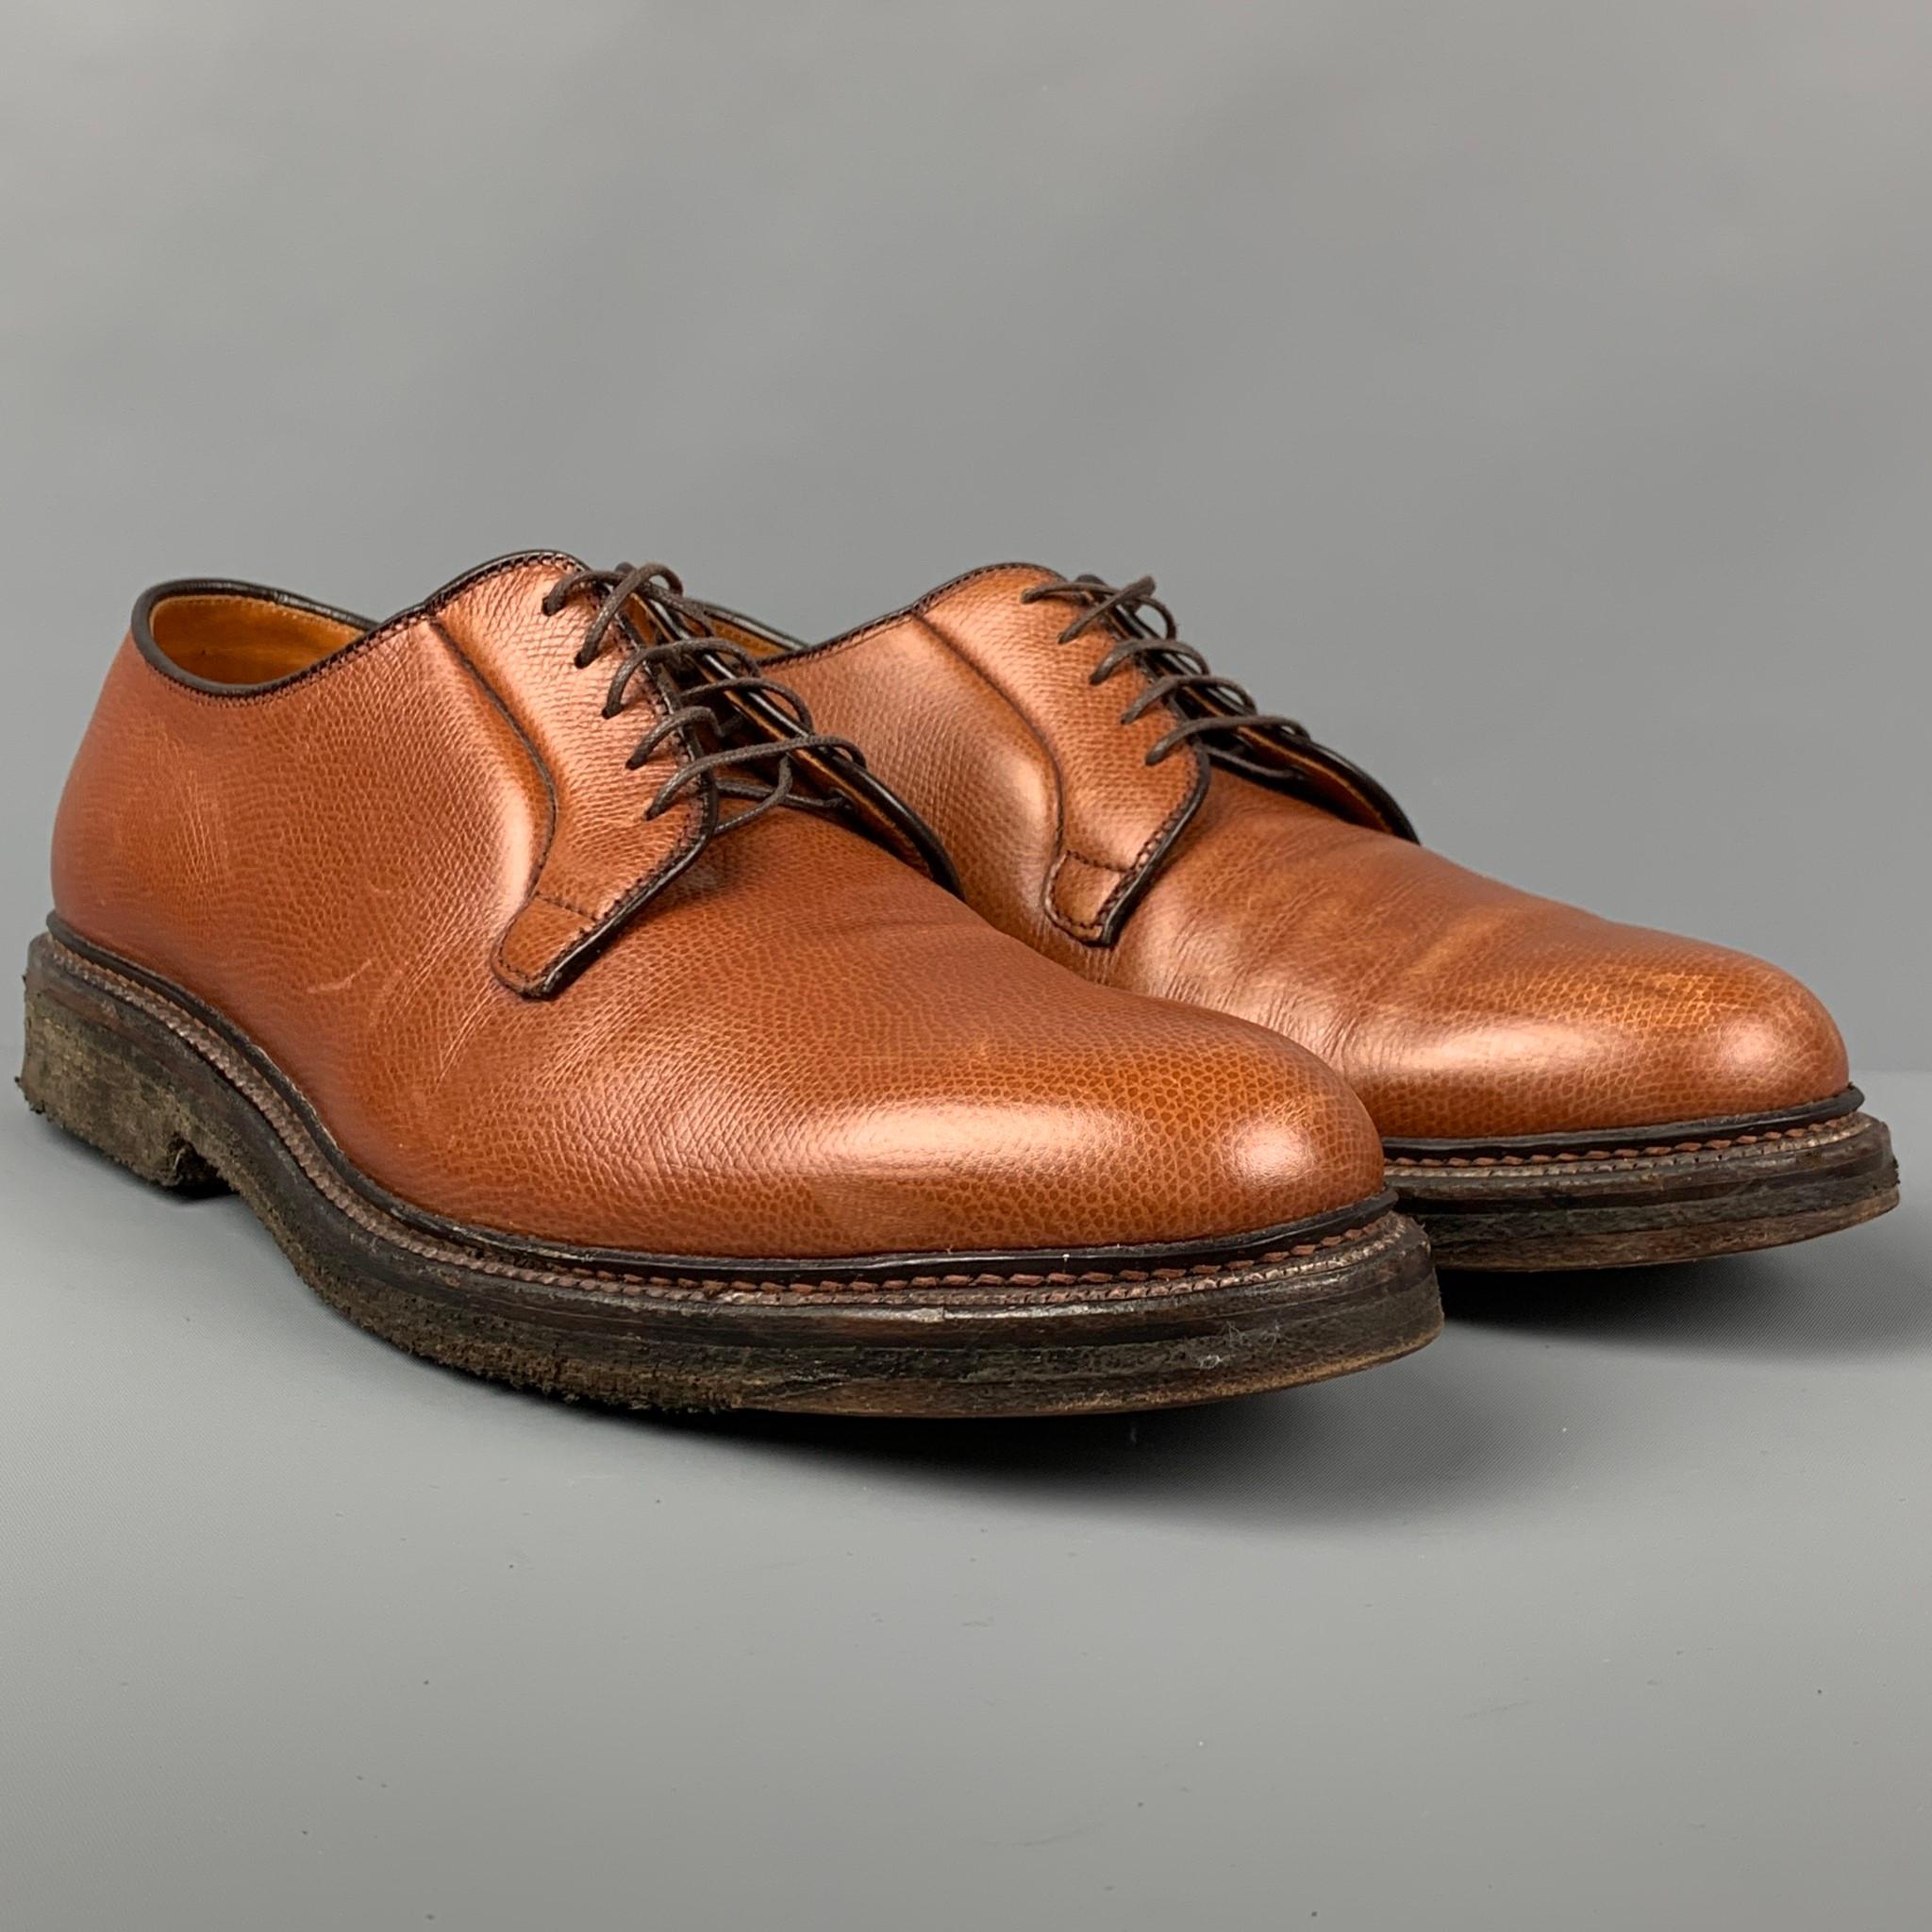 ALDEN shoes comes in a tan pebble grain leather featuring a crepe sole and a lace up closure. Includes shoe tress. 

Very Good Pre-Owned Condition.
Marked: 10.5 B/D

Outsole: 13 in. x 4.5 in. 